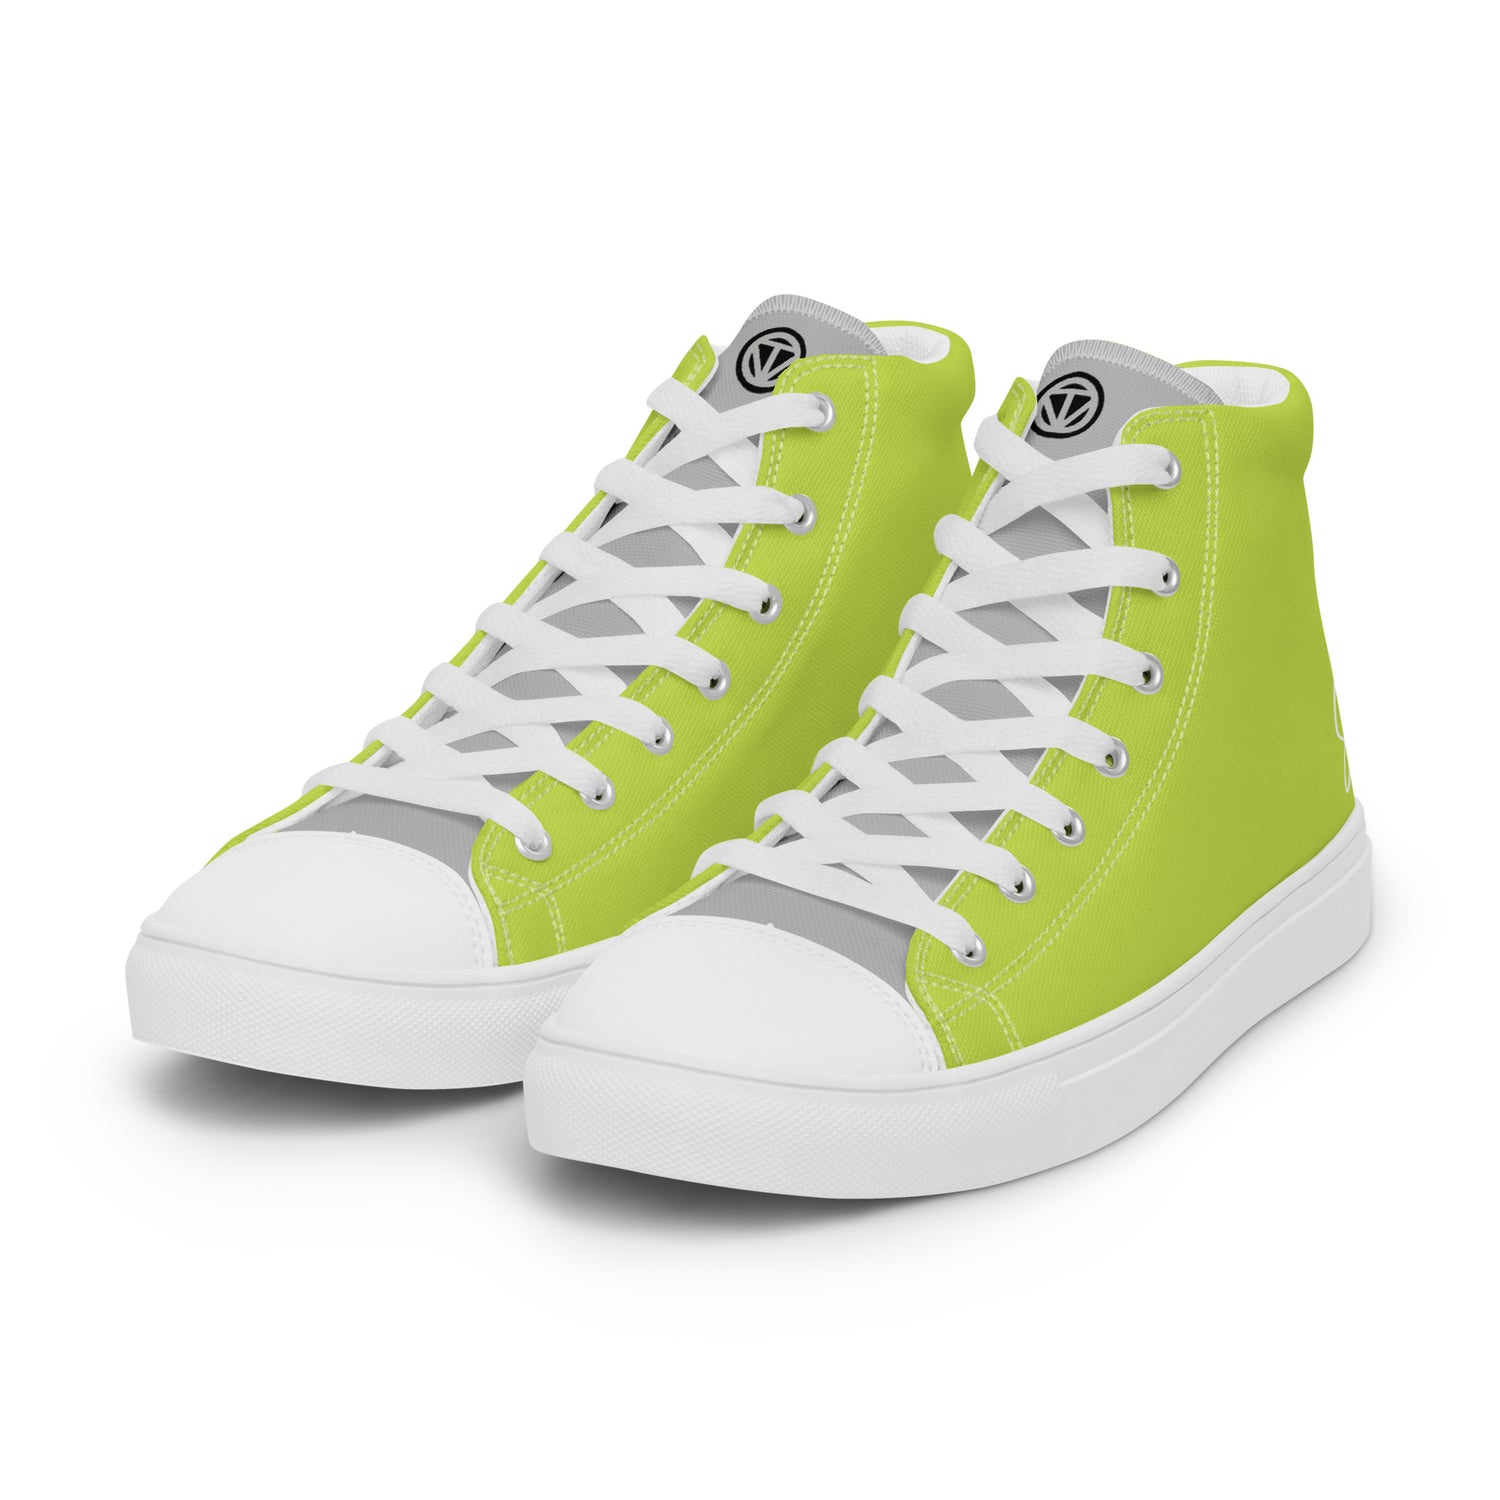 TIME OF VIBES TOV Damen High Sneaker MyVIBES + Initials - €189,00